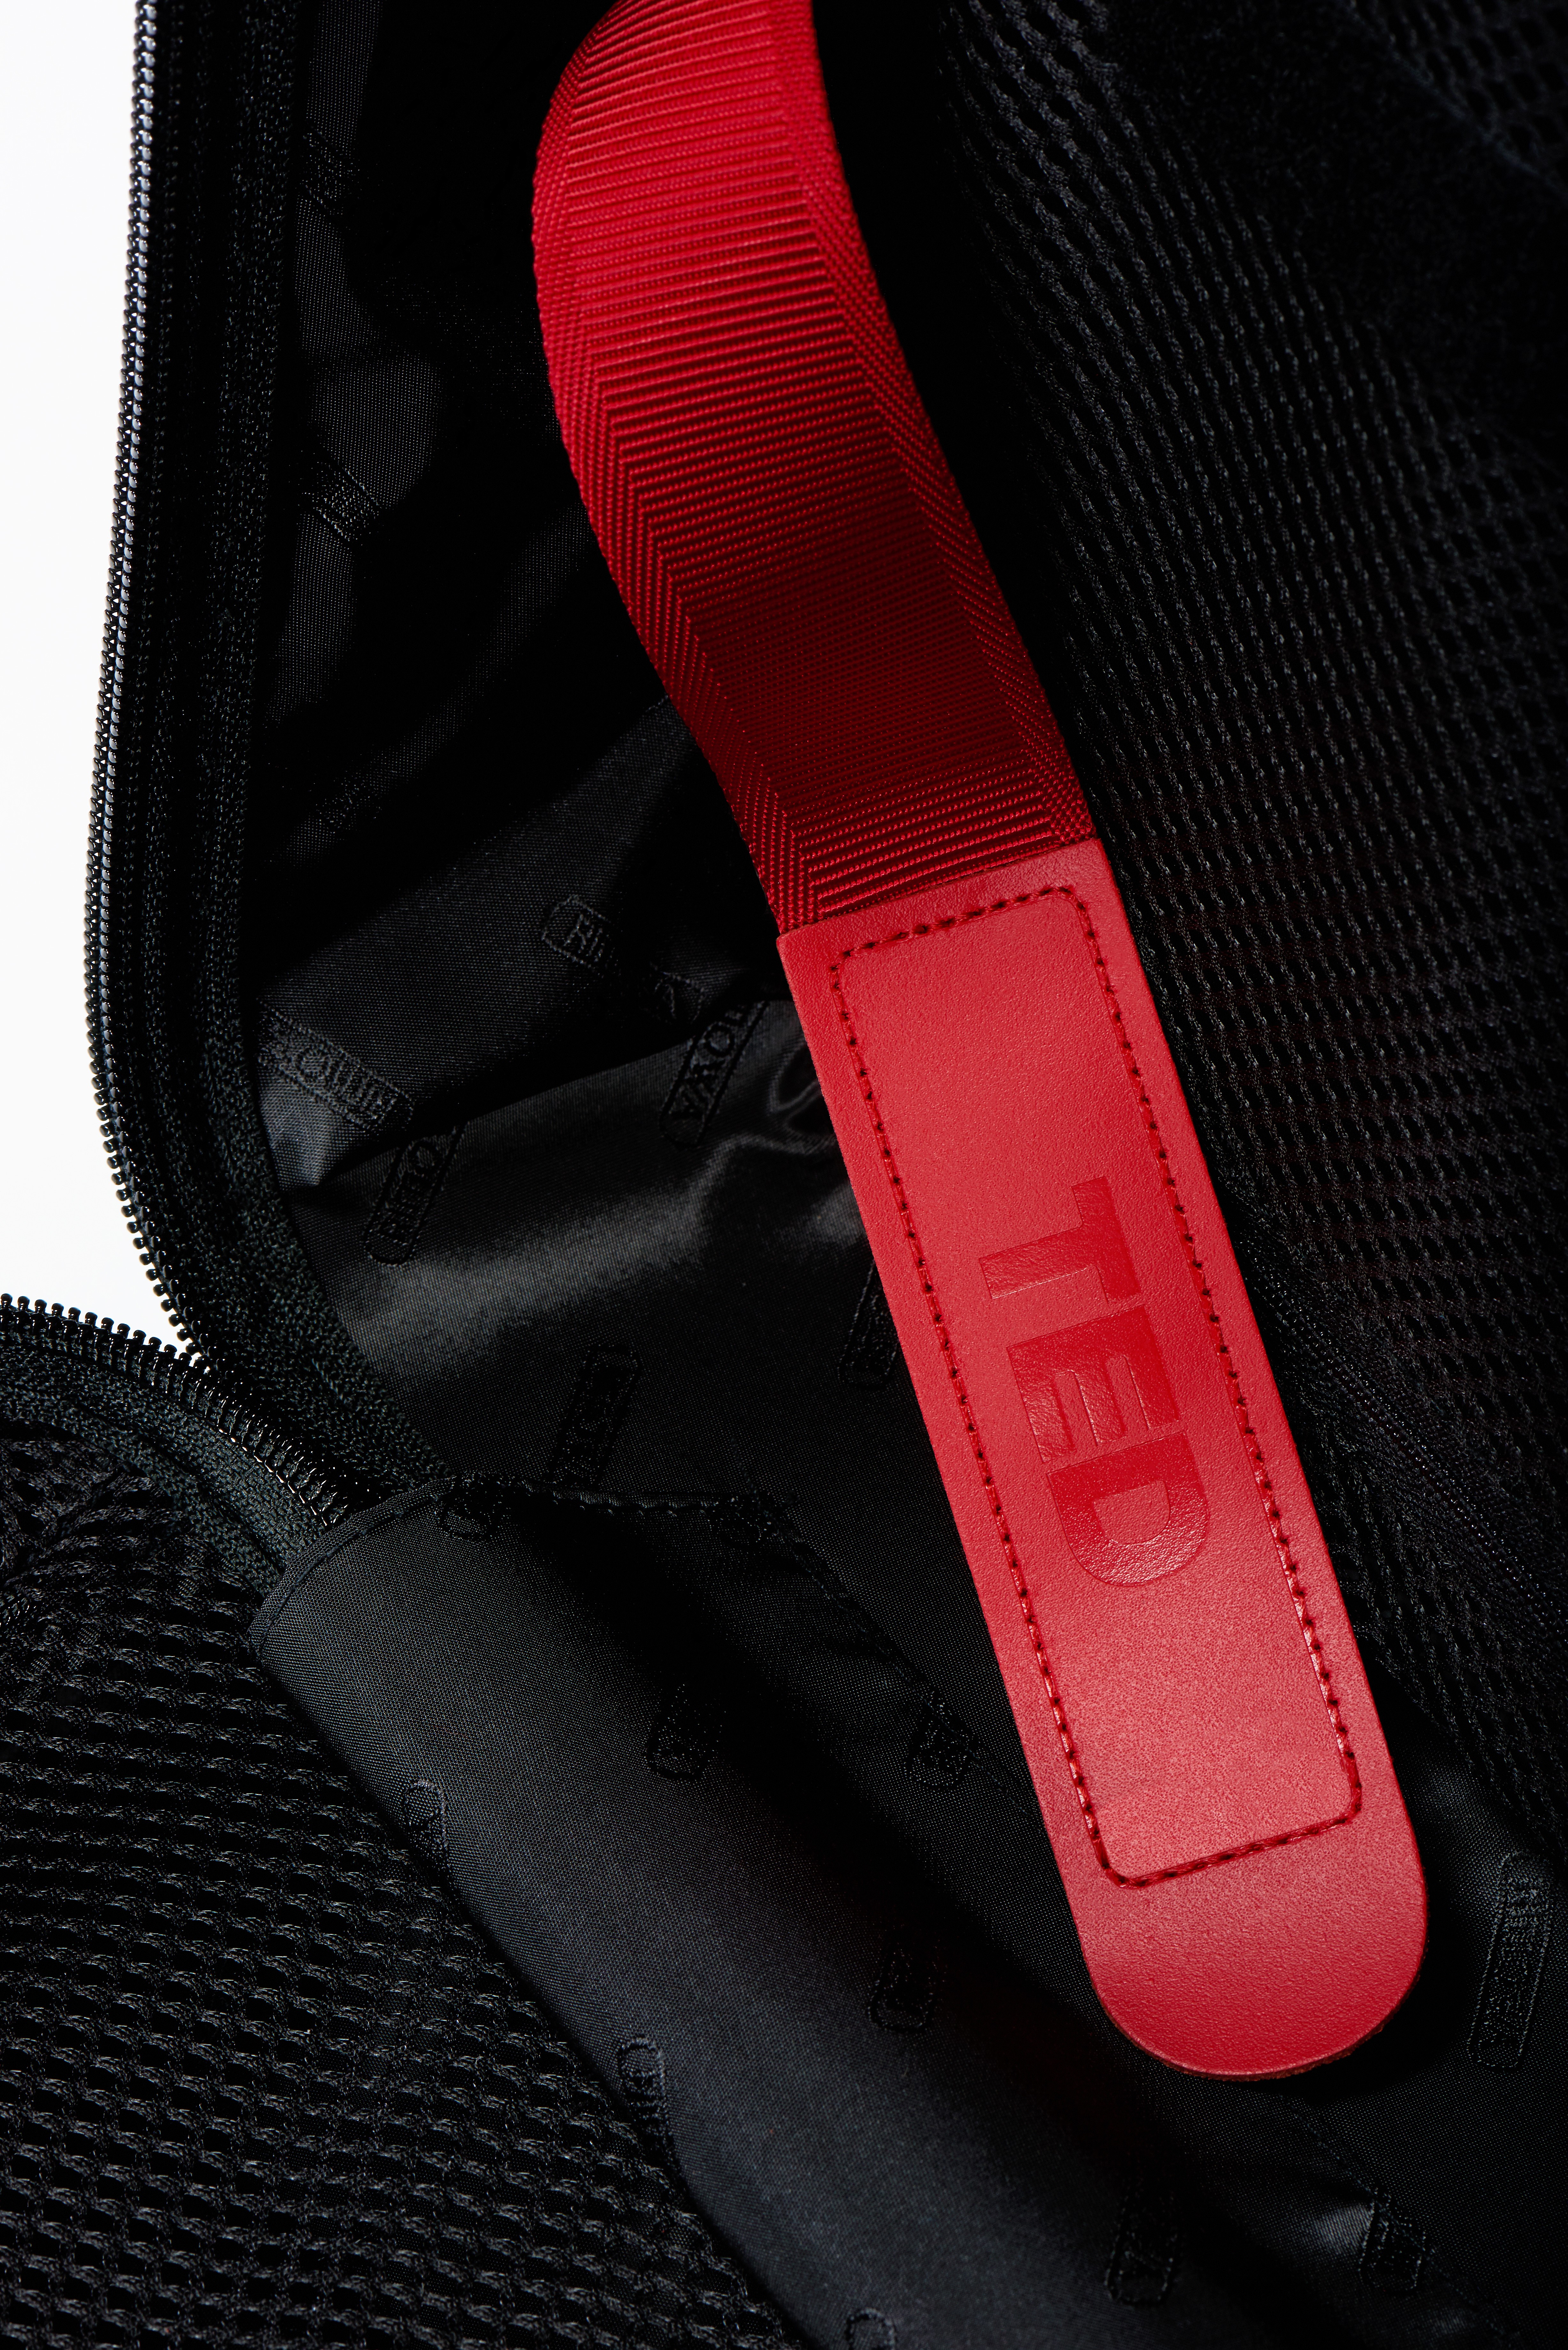 Rimowa customised 2,000 suitcases given out free to people attending this month’s TED Conference 2018, which included special TED logos on the label tags and internal red luggage straps.